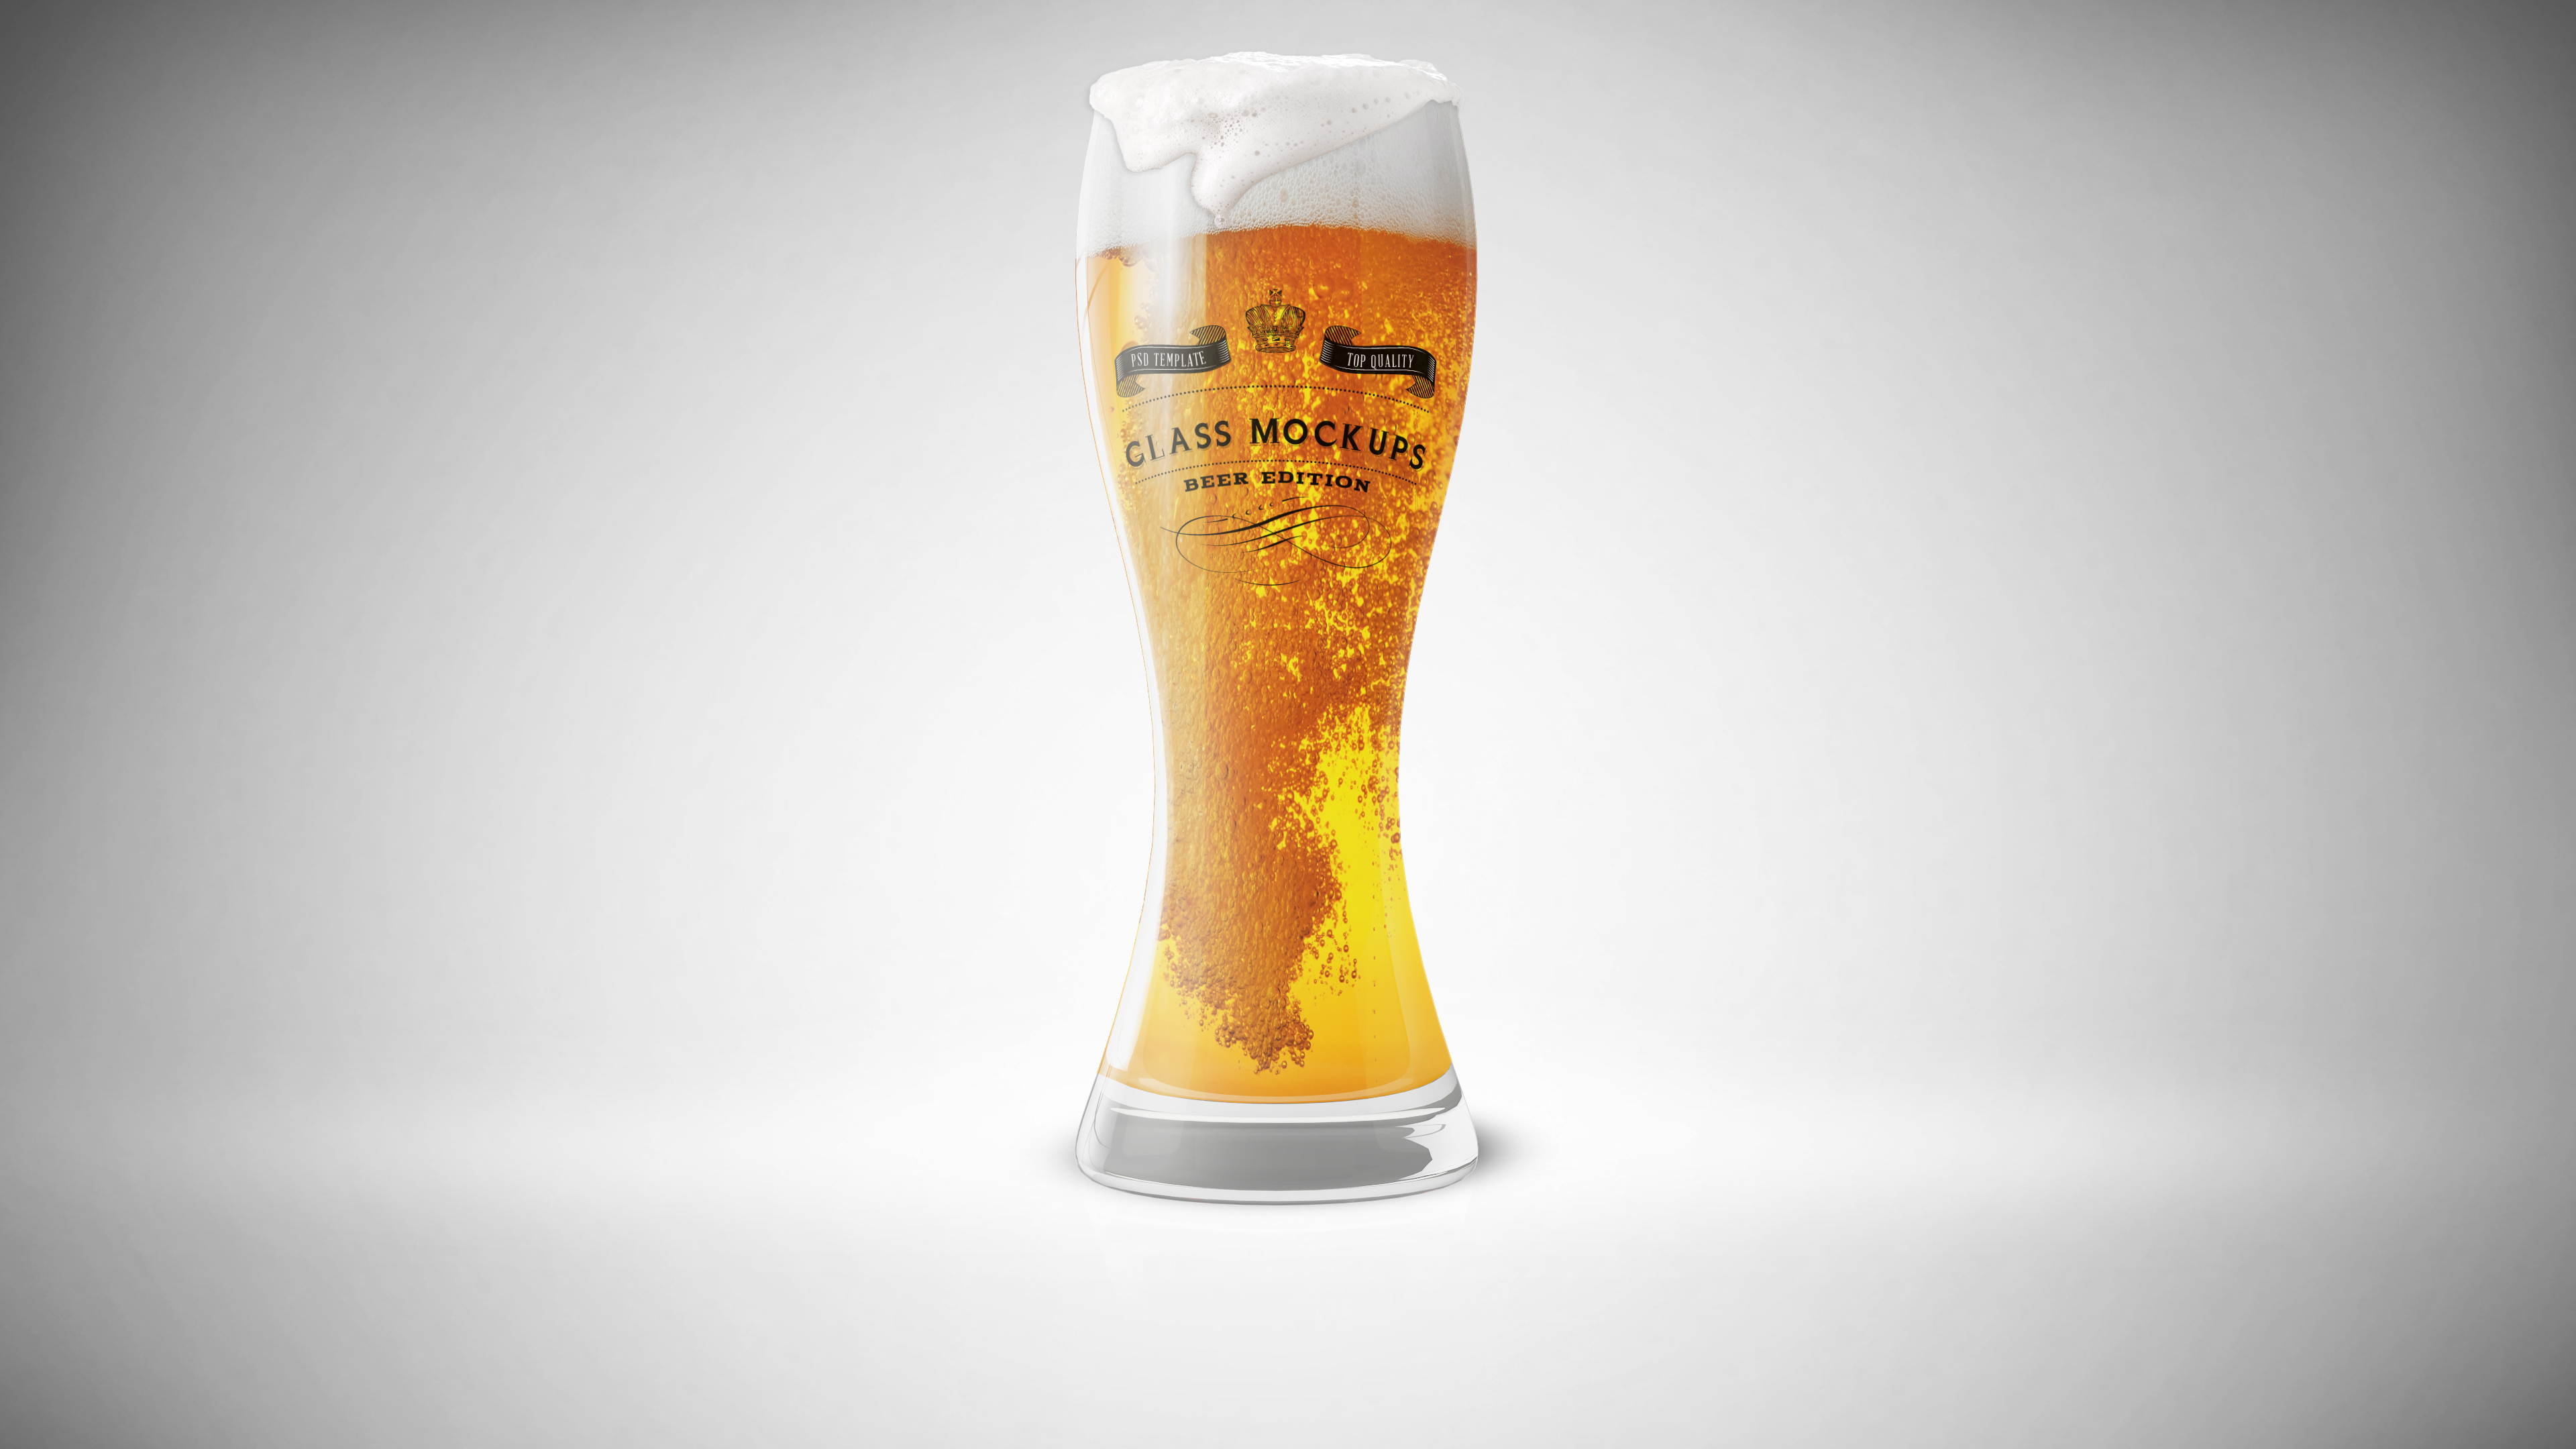 Download Mockup Beer Glass Free / Beer glass and bottle with label ...